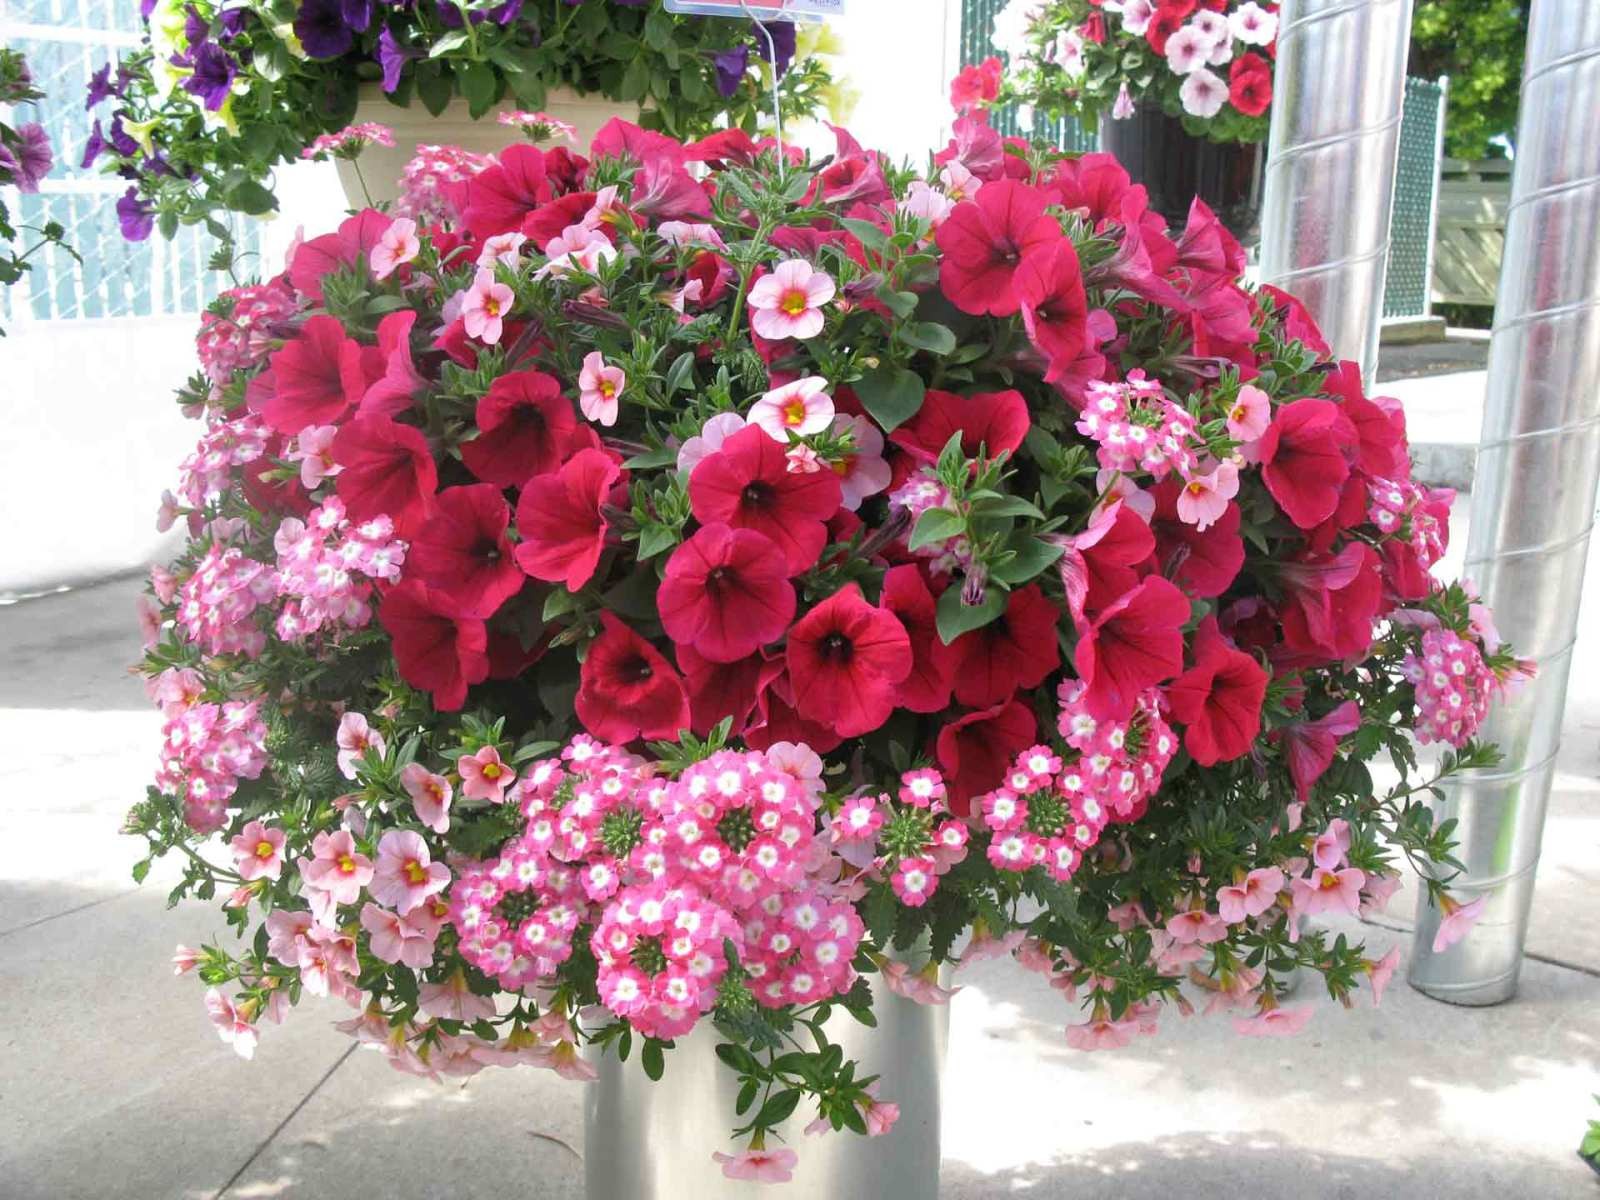 Beautiful Hanging Basket, red and white Flowers, PetuniasLocation: Unknown Year: 2008